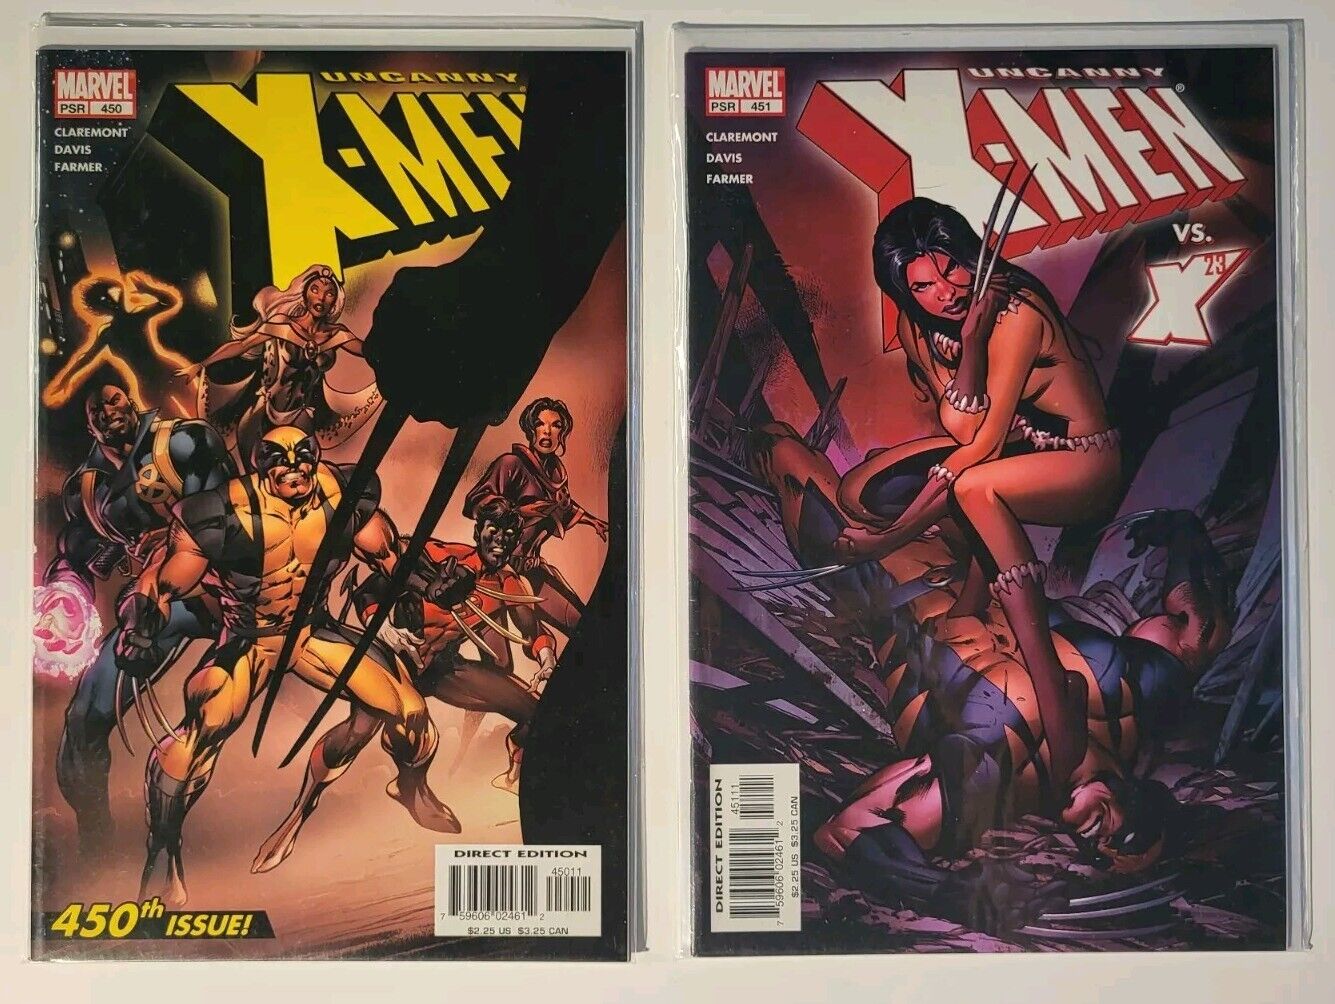 Uncanny X-men 450 & 451 - 1st meeting of X-23 Laura Kinney and Wolverine / X-Men